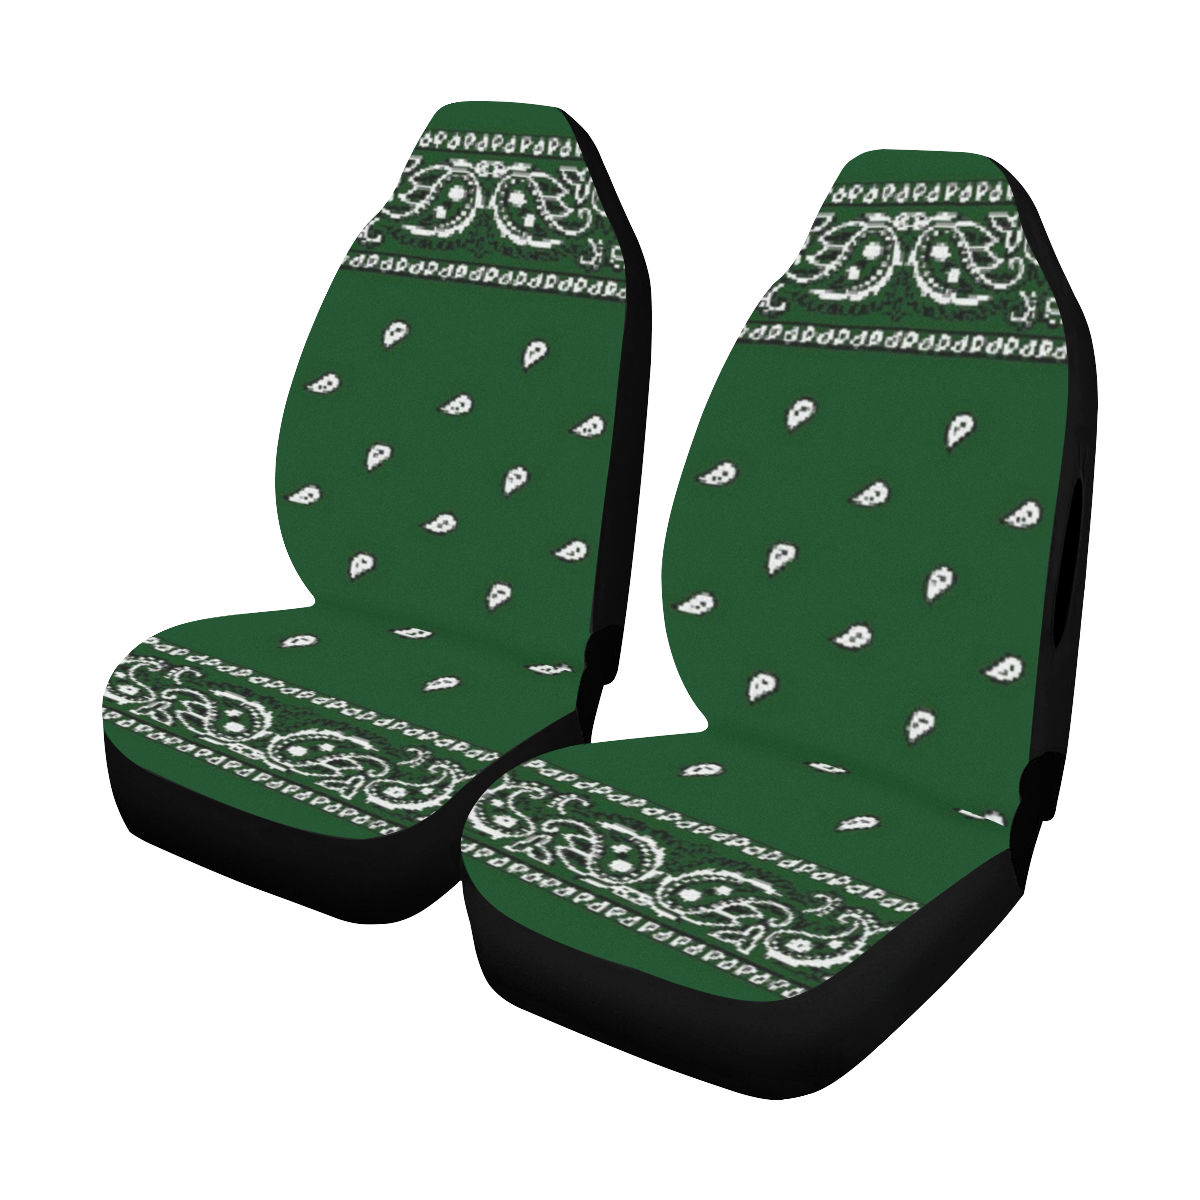 KERCHIEF PATTERN GREEN Car Seat Cover Airbag Compatible (Set of 2)